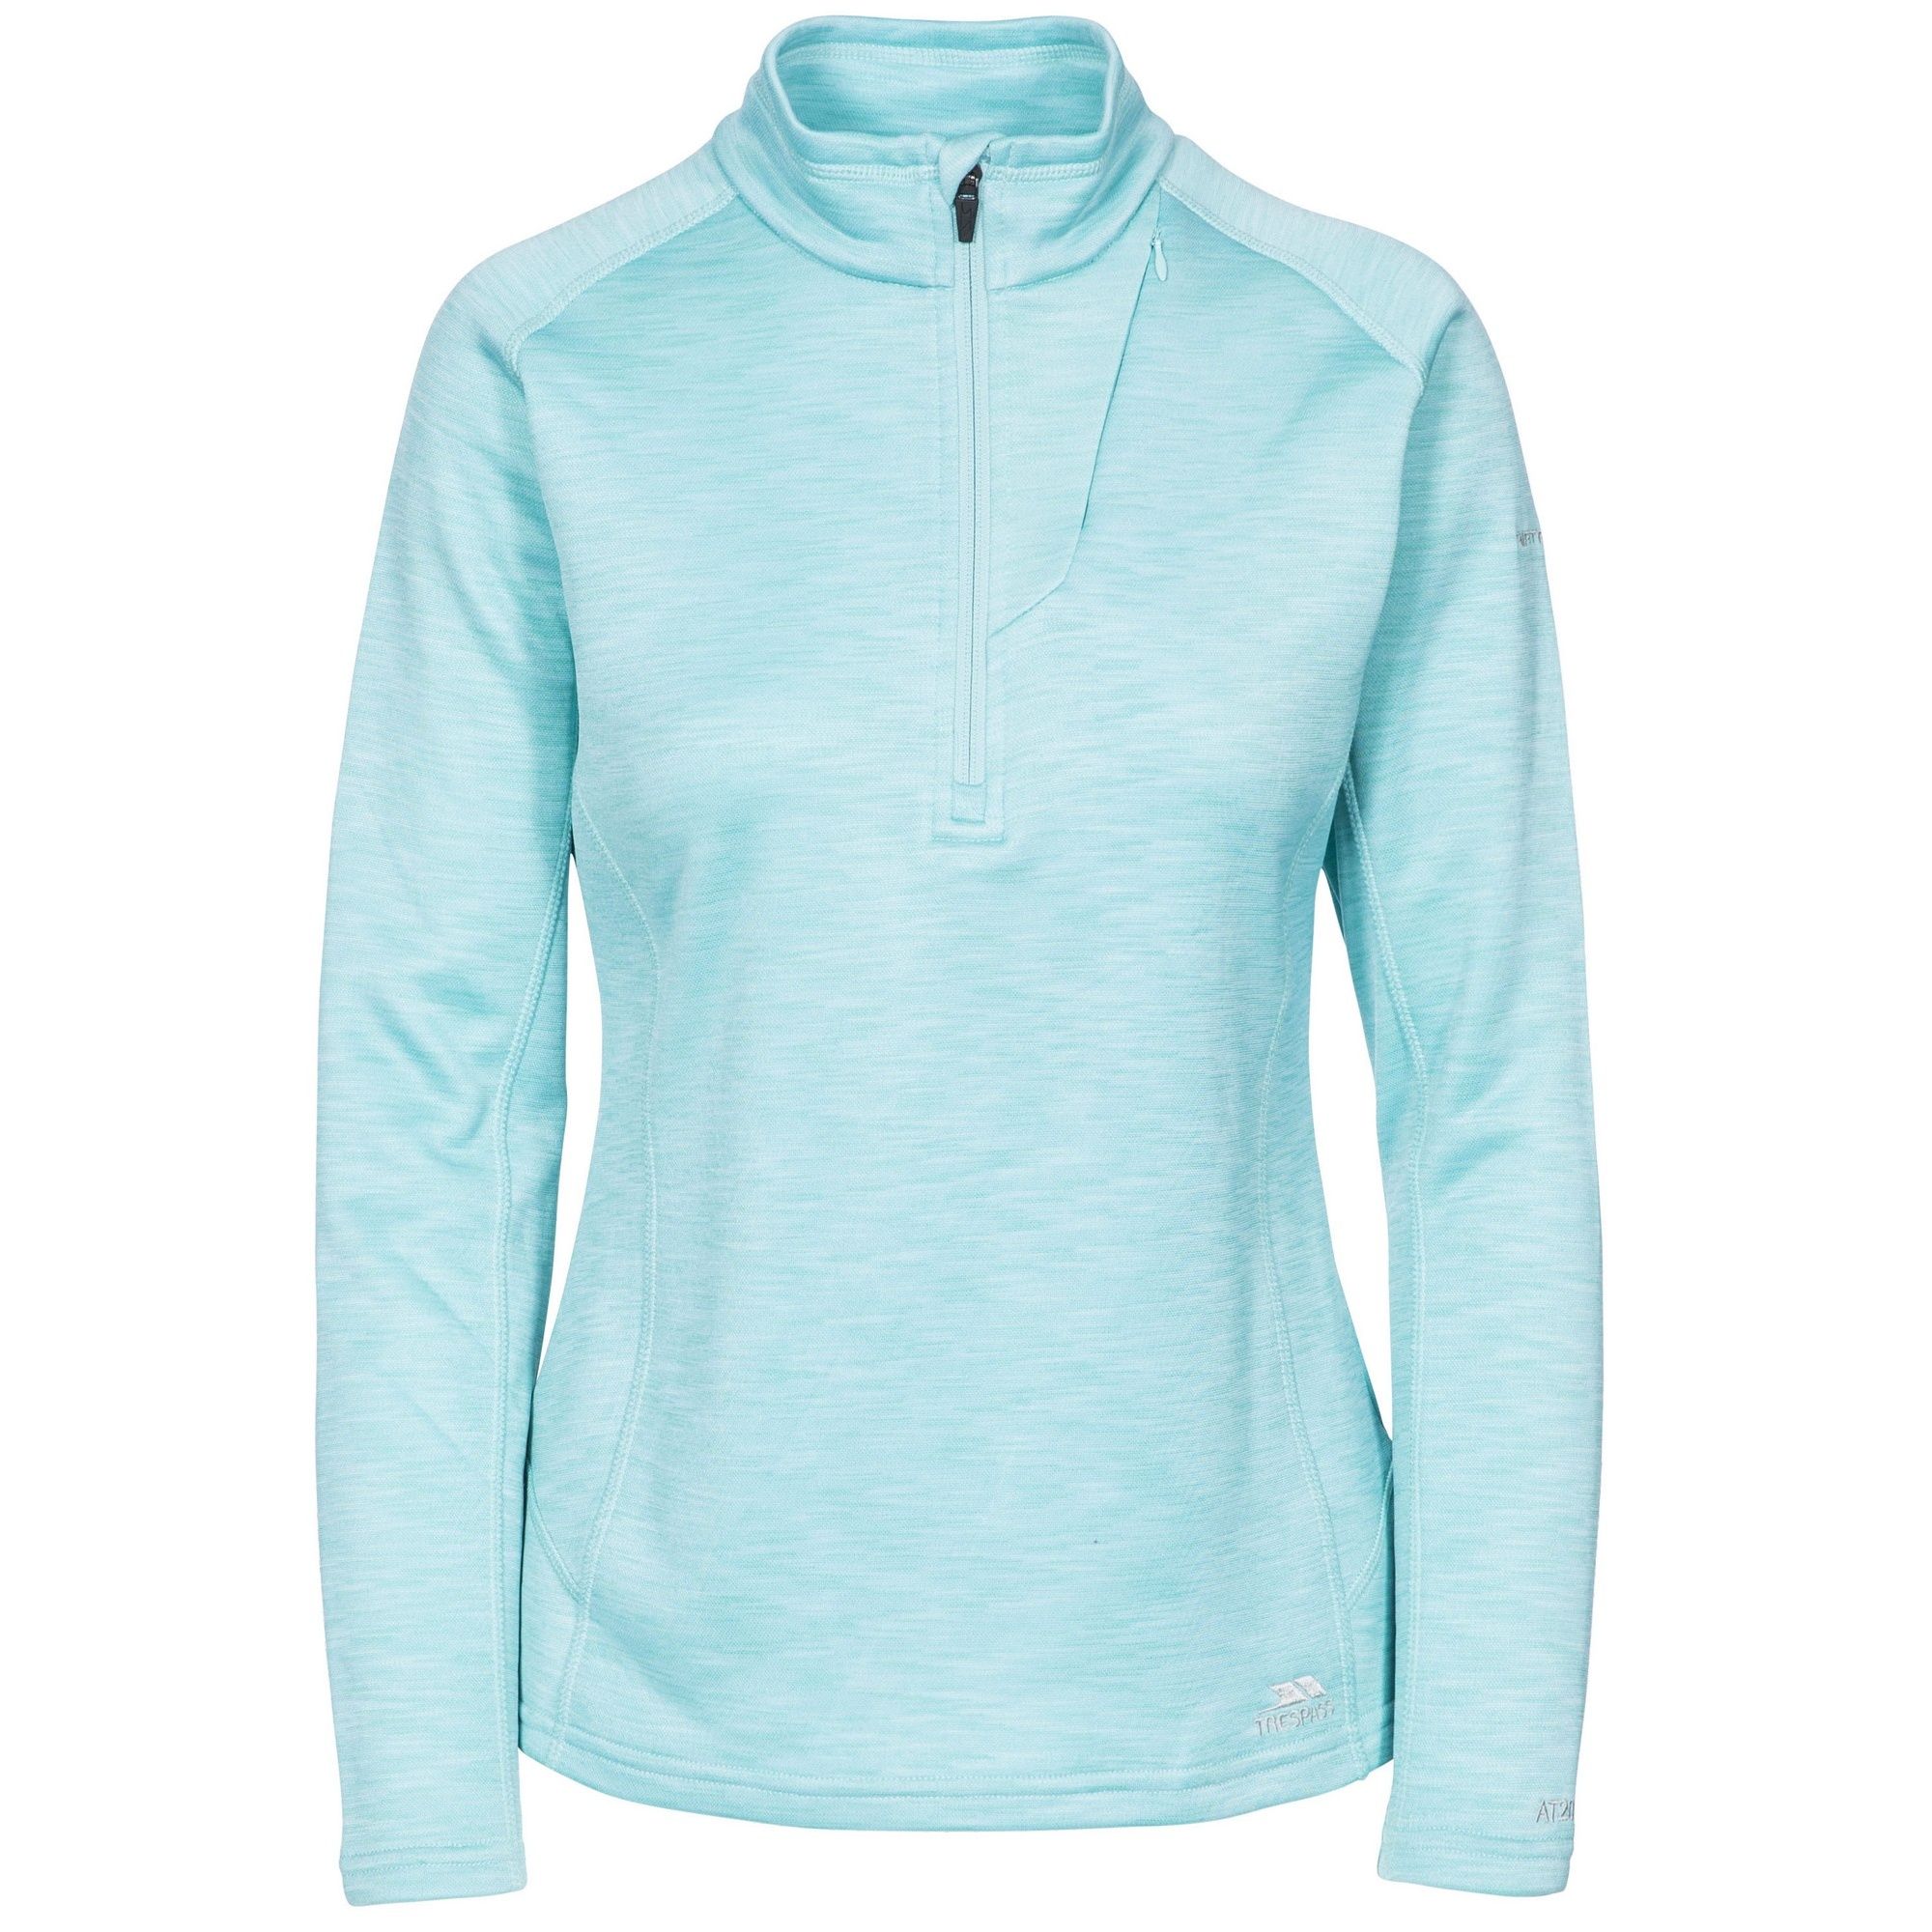 200gsm airtrap fleece. Slub effect fleece. 1/2 zip neck with chin guard. Concealed zip pocket. Flat cuff. 100% Polyester. Trespass Womens Chest Sizing (approx): XS/8 - 32in/81cm, S/10 - 34in/86cm, M/12 - 36in/91.4cm, L/14 - 38in/96.5cm, XL/16 - 40in/101.5cm, XXL/18 - 42in/106.5cm.